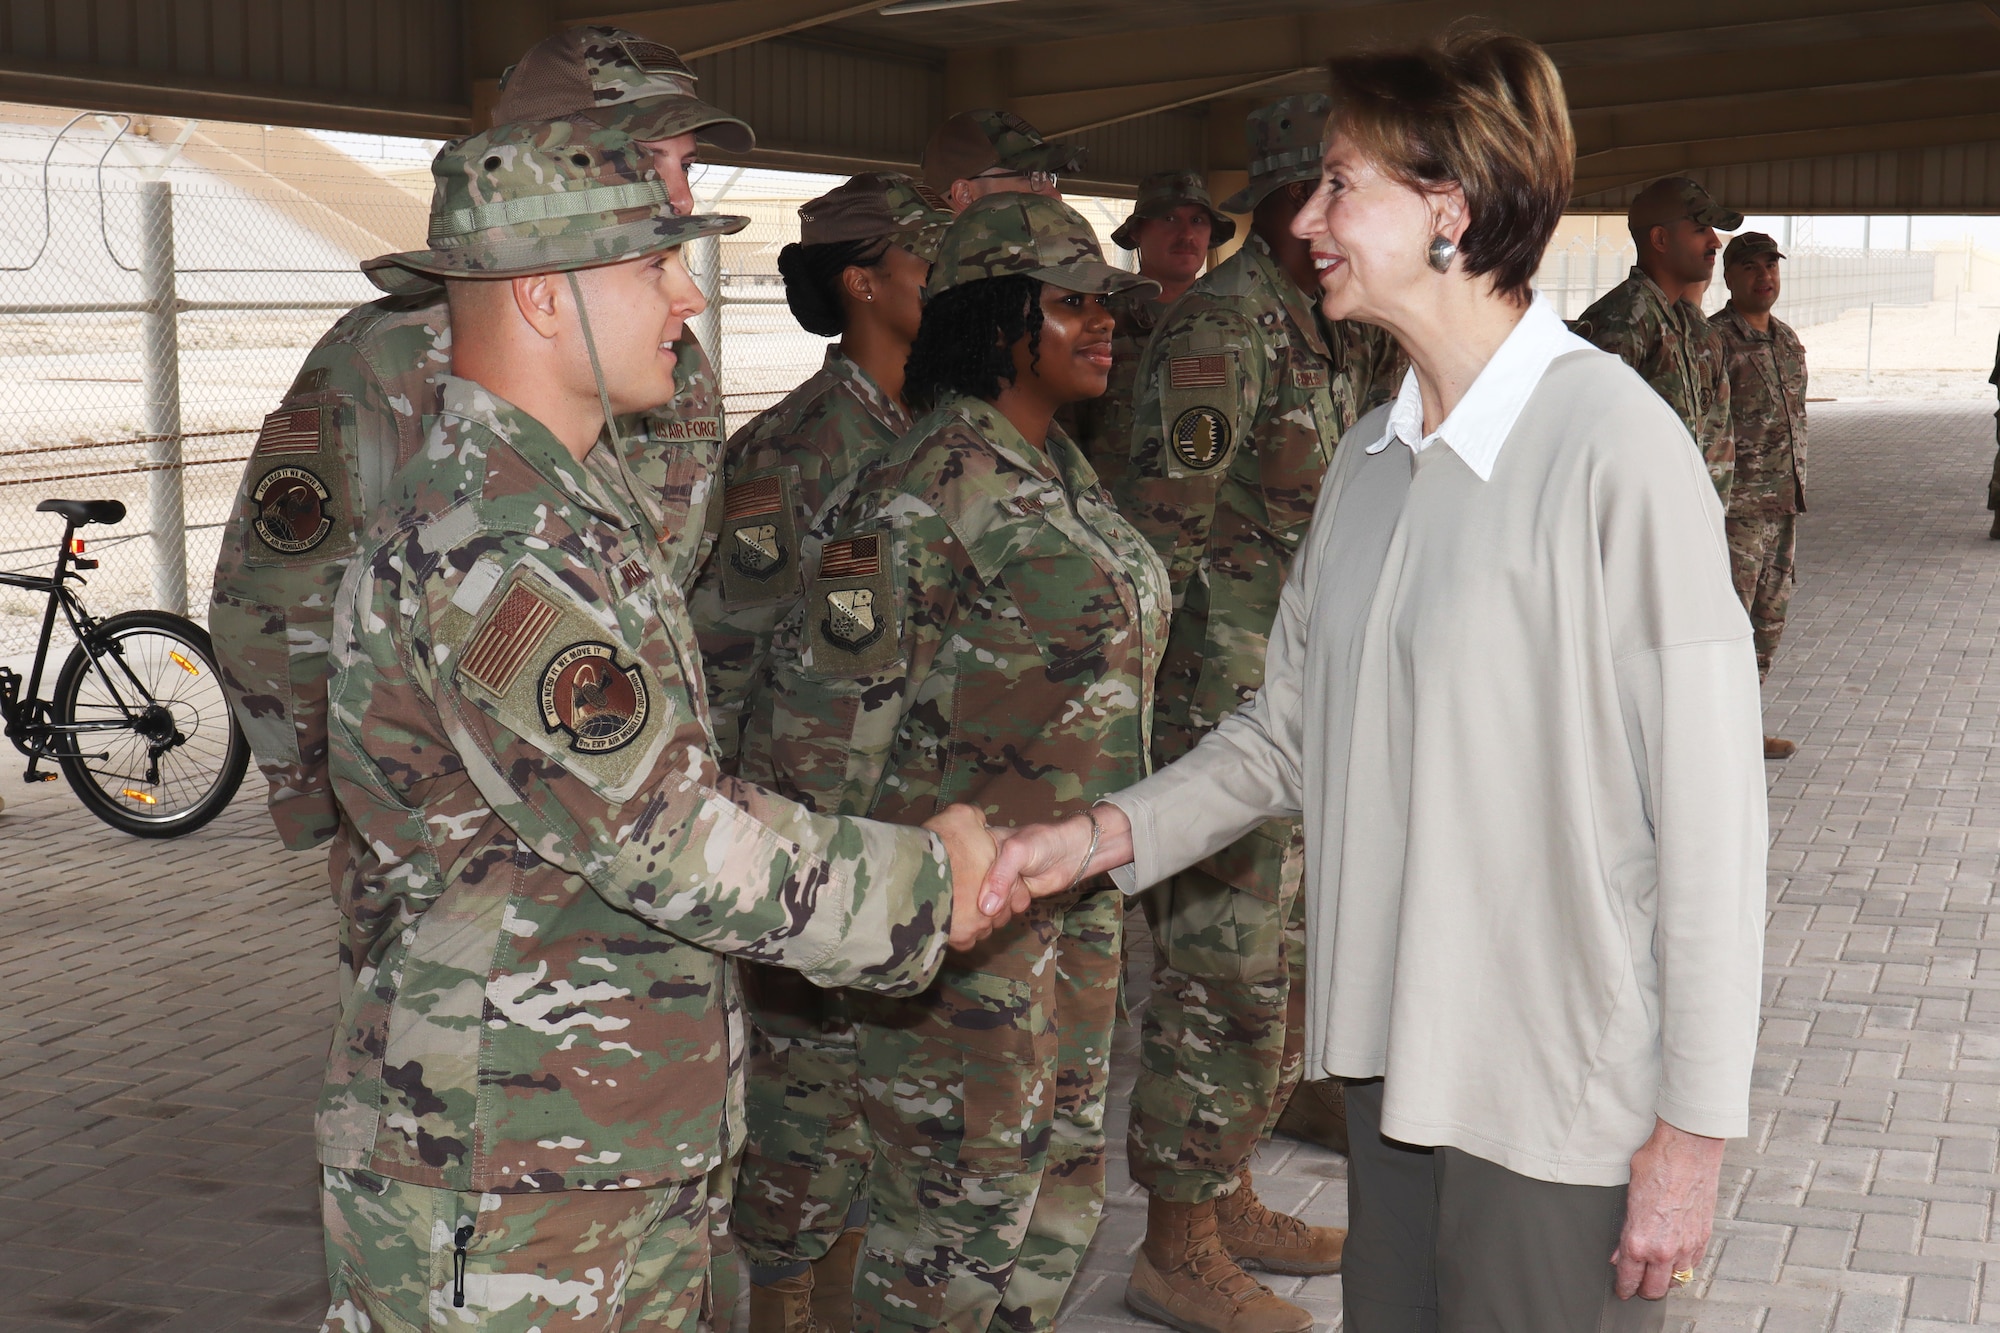 Secretary of the Air Force Barbara Barrett presents the SECAF coin to Staff Sgt. Joshua Maurer, 8th Expeditionary Aircraft Maintenance Squadron, at Al Udeid Air Base, Qatar on Nov. 18, 2019. During their first overseas trip, Barrett and Air Force Chief of Staff Gen. David L. Goldfein met with AUAB and Qatari leadership, held an all-call where they spoke to readiness, lethality and the future of the U.S. Air Force and visited Airmen and the facilities where they work and live.(U.S. Air Force photo by Tech. Sgt. Ian Dean)